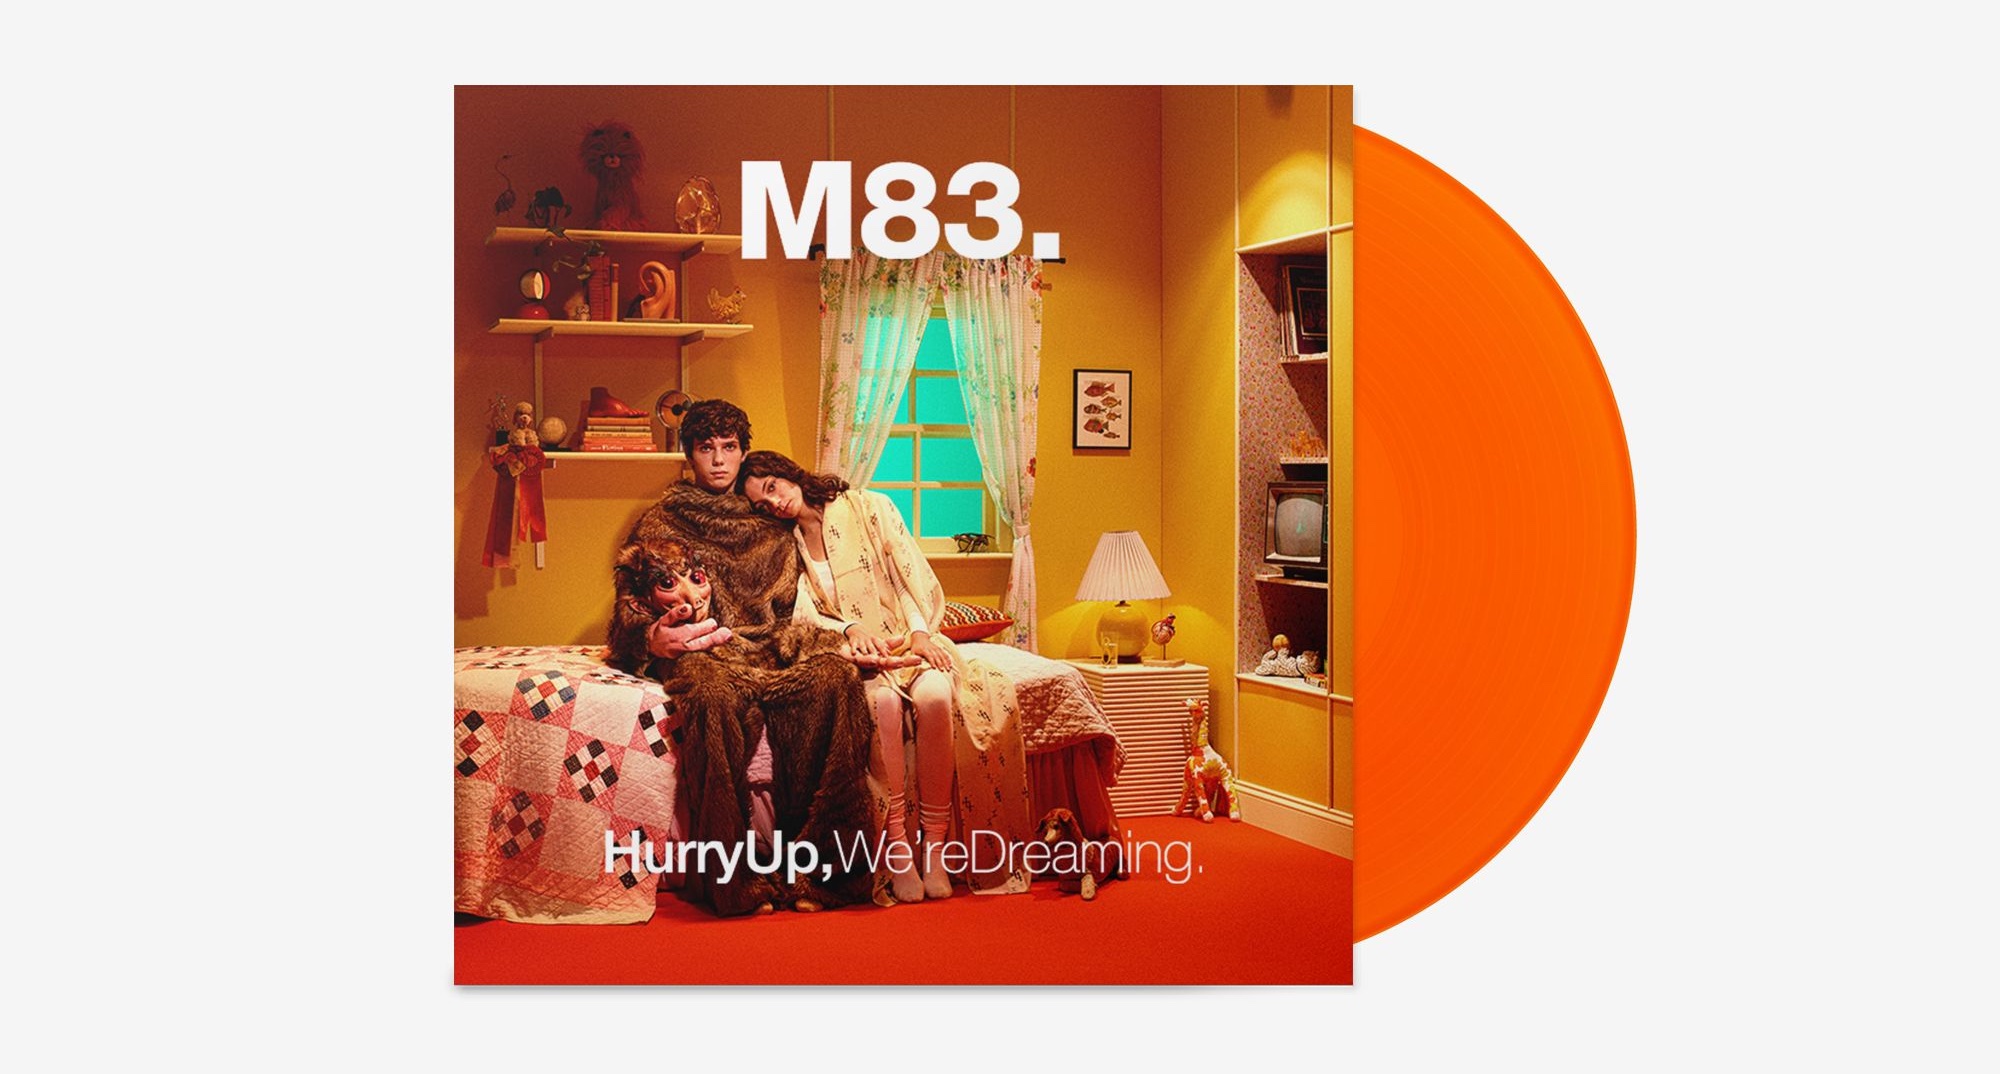 M83 Hurry Up We're Dreaming vinyl